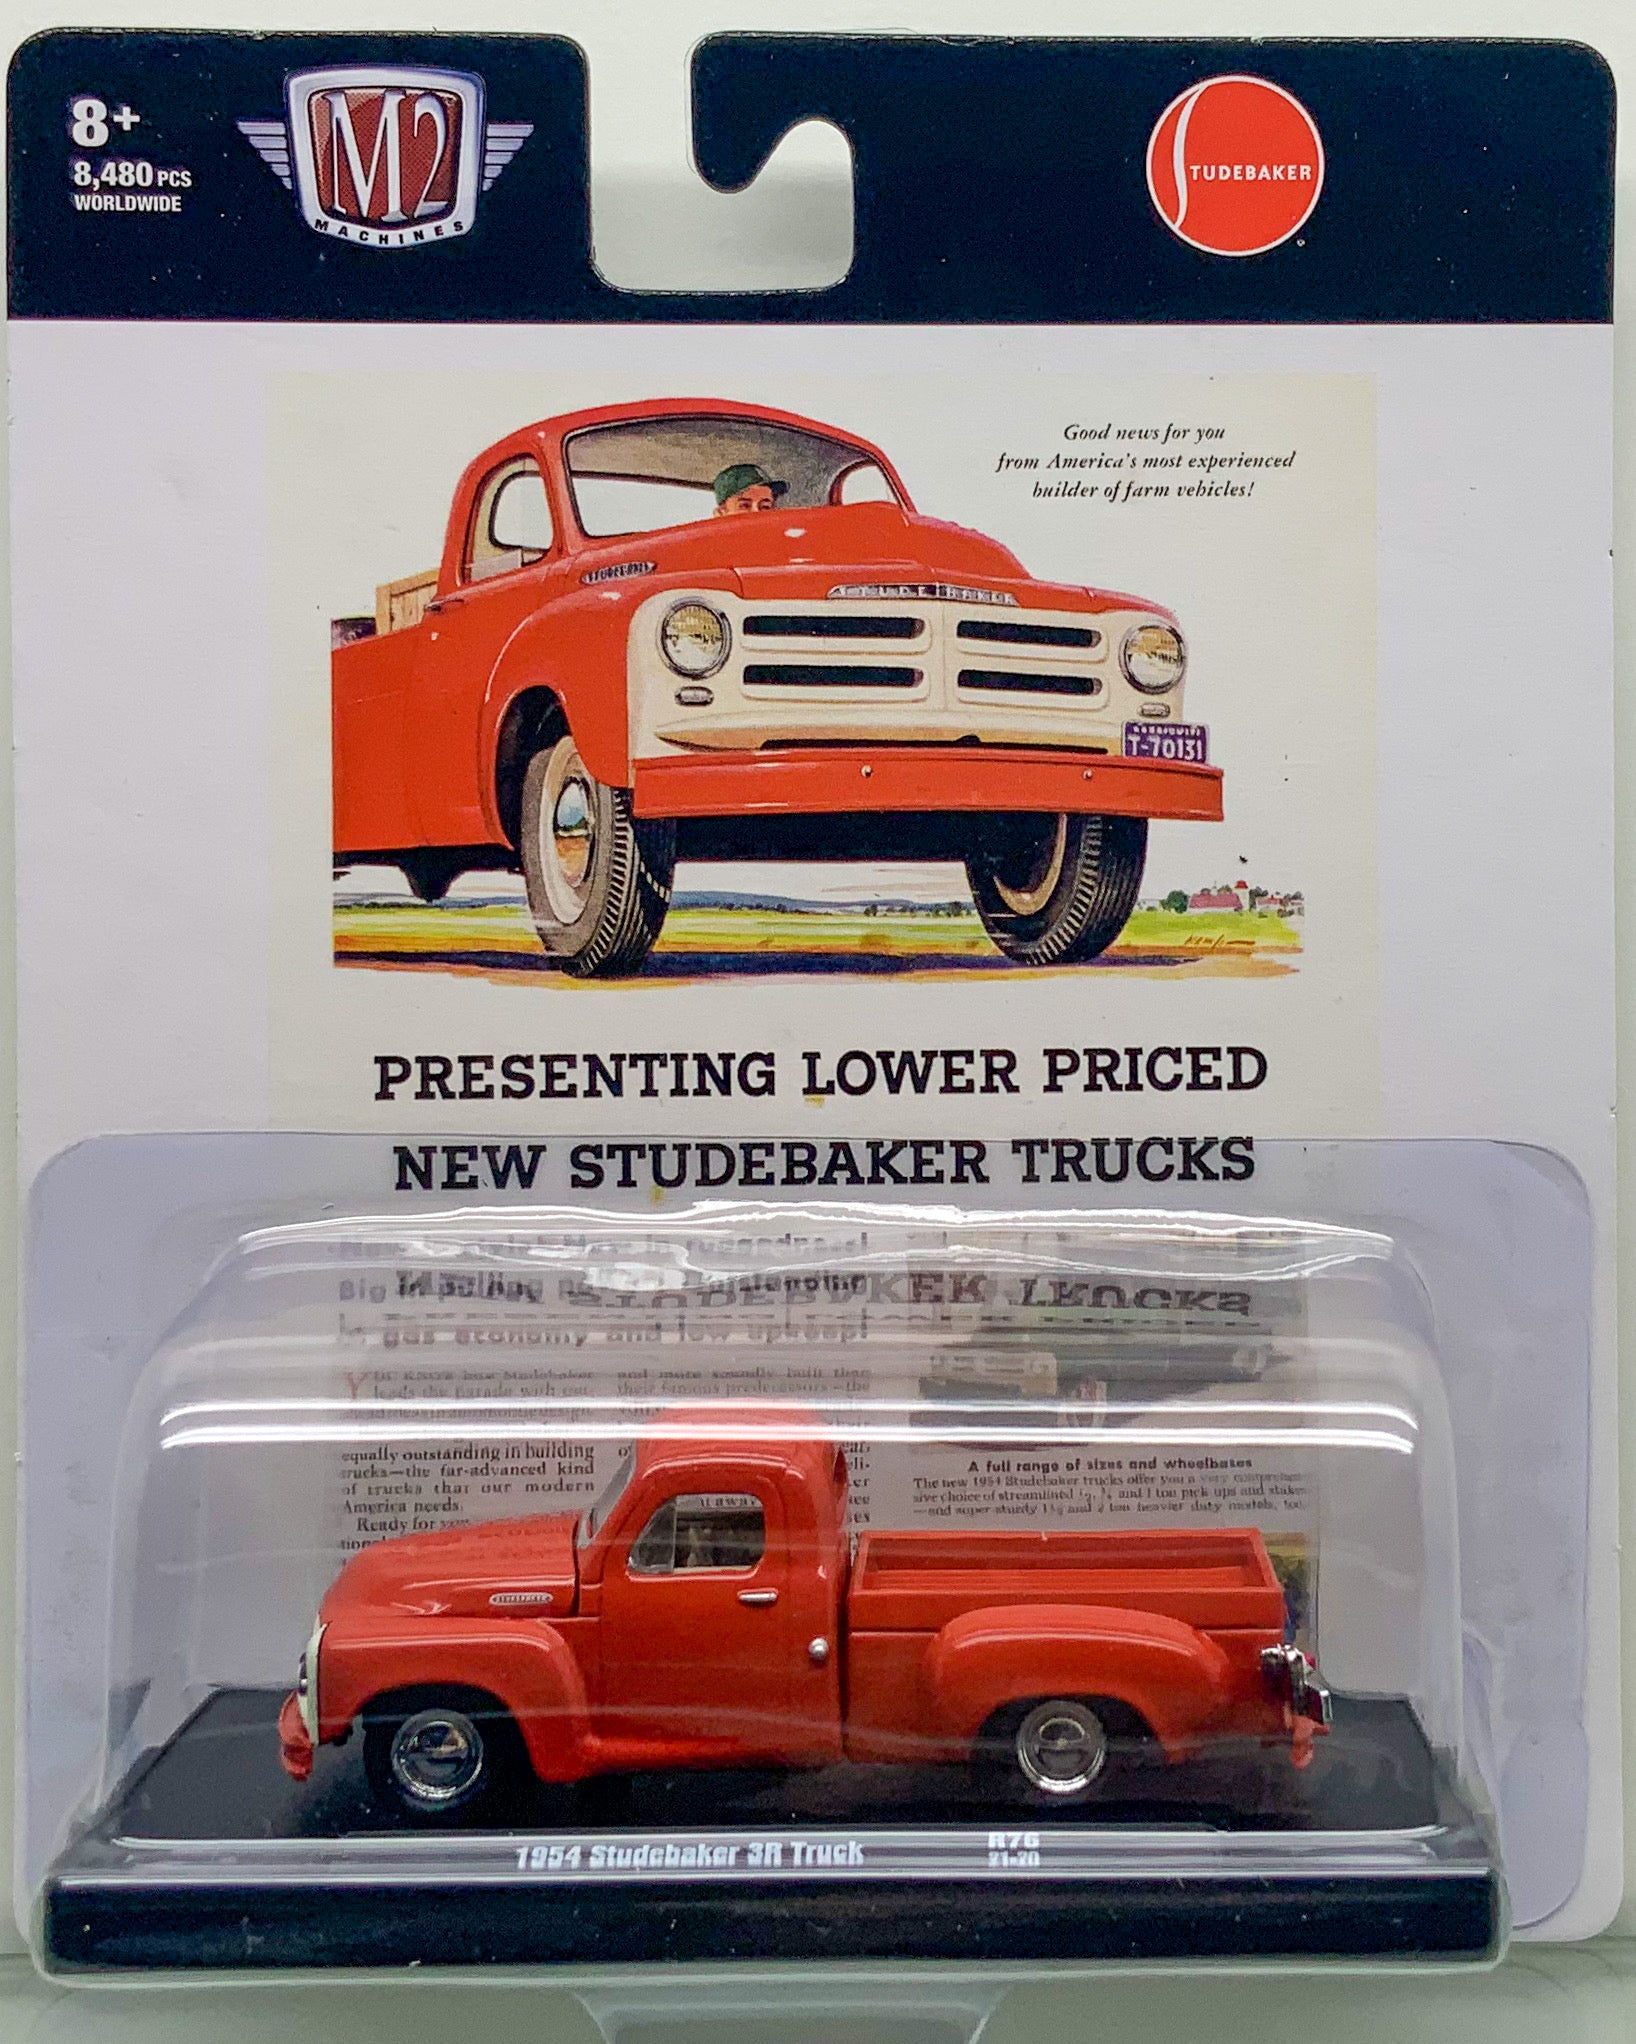 Buy at Tatoyshop.com M2 Machines 1:64 1956 Ford F-100 Truck Auto-Drivers Maui & Sons Auto-Drivers  Shop Now Shopify List #76 M2 Auto Drivers 1968 Mercury Cougar XR-7 1954 Studebaker 3R Truck 1956 Ford F-100 Truck 1958 Chevrolet Impala 1968 Chevrolet Camaro SS 350 1969 Plymouth Road Runner 440